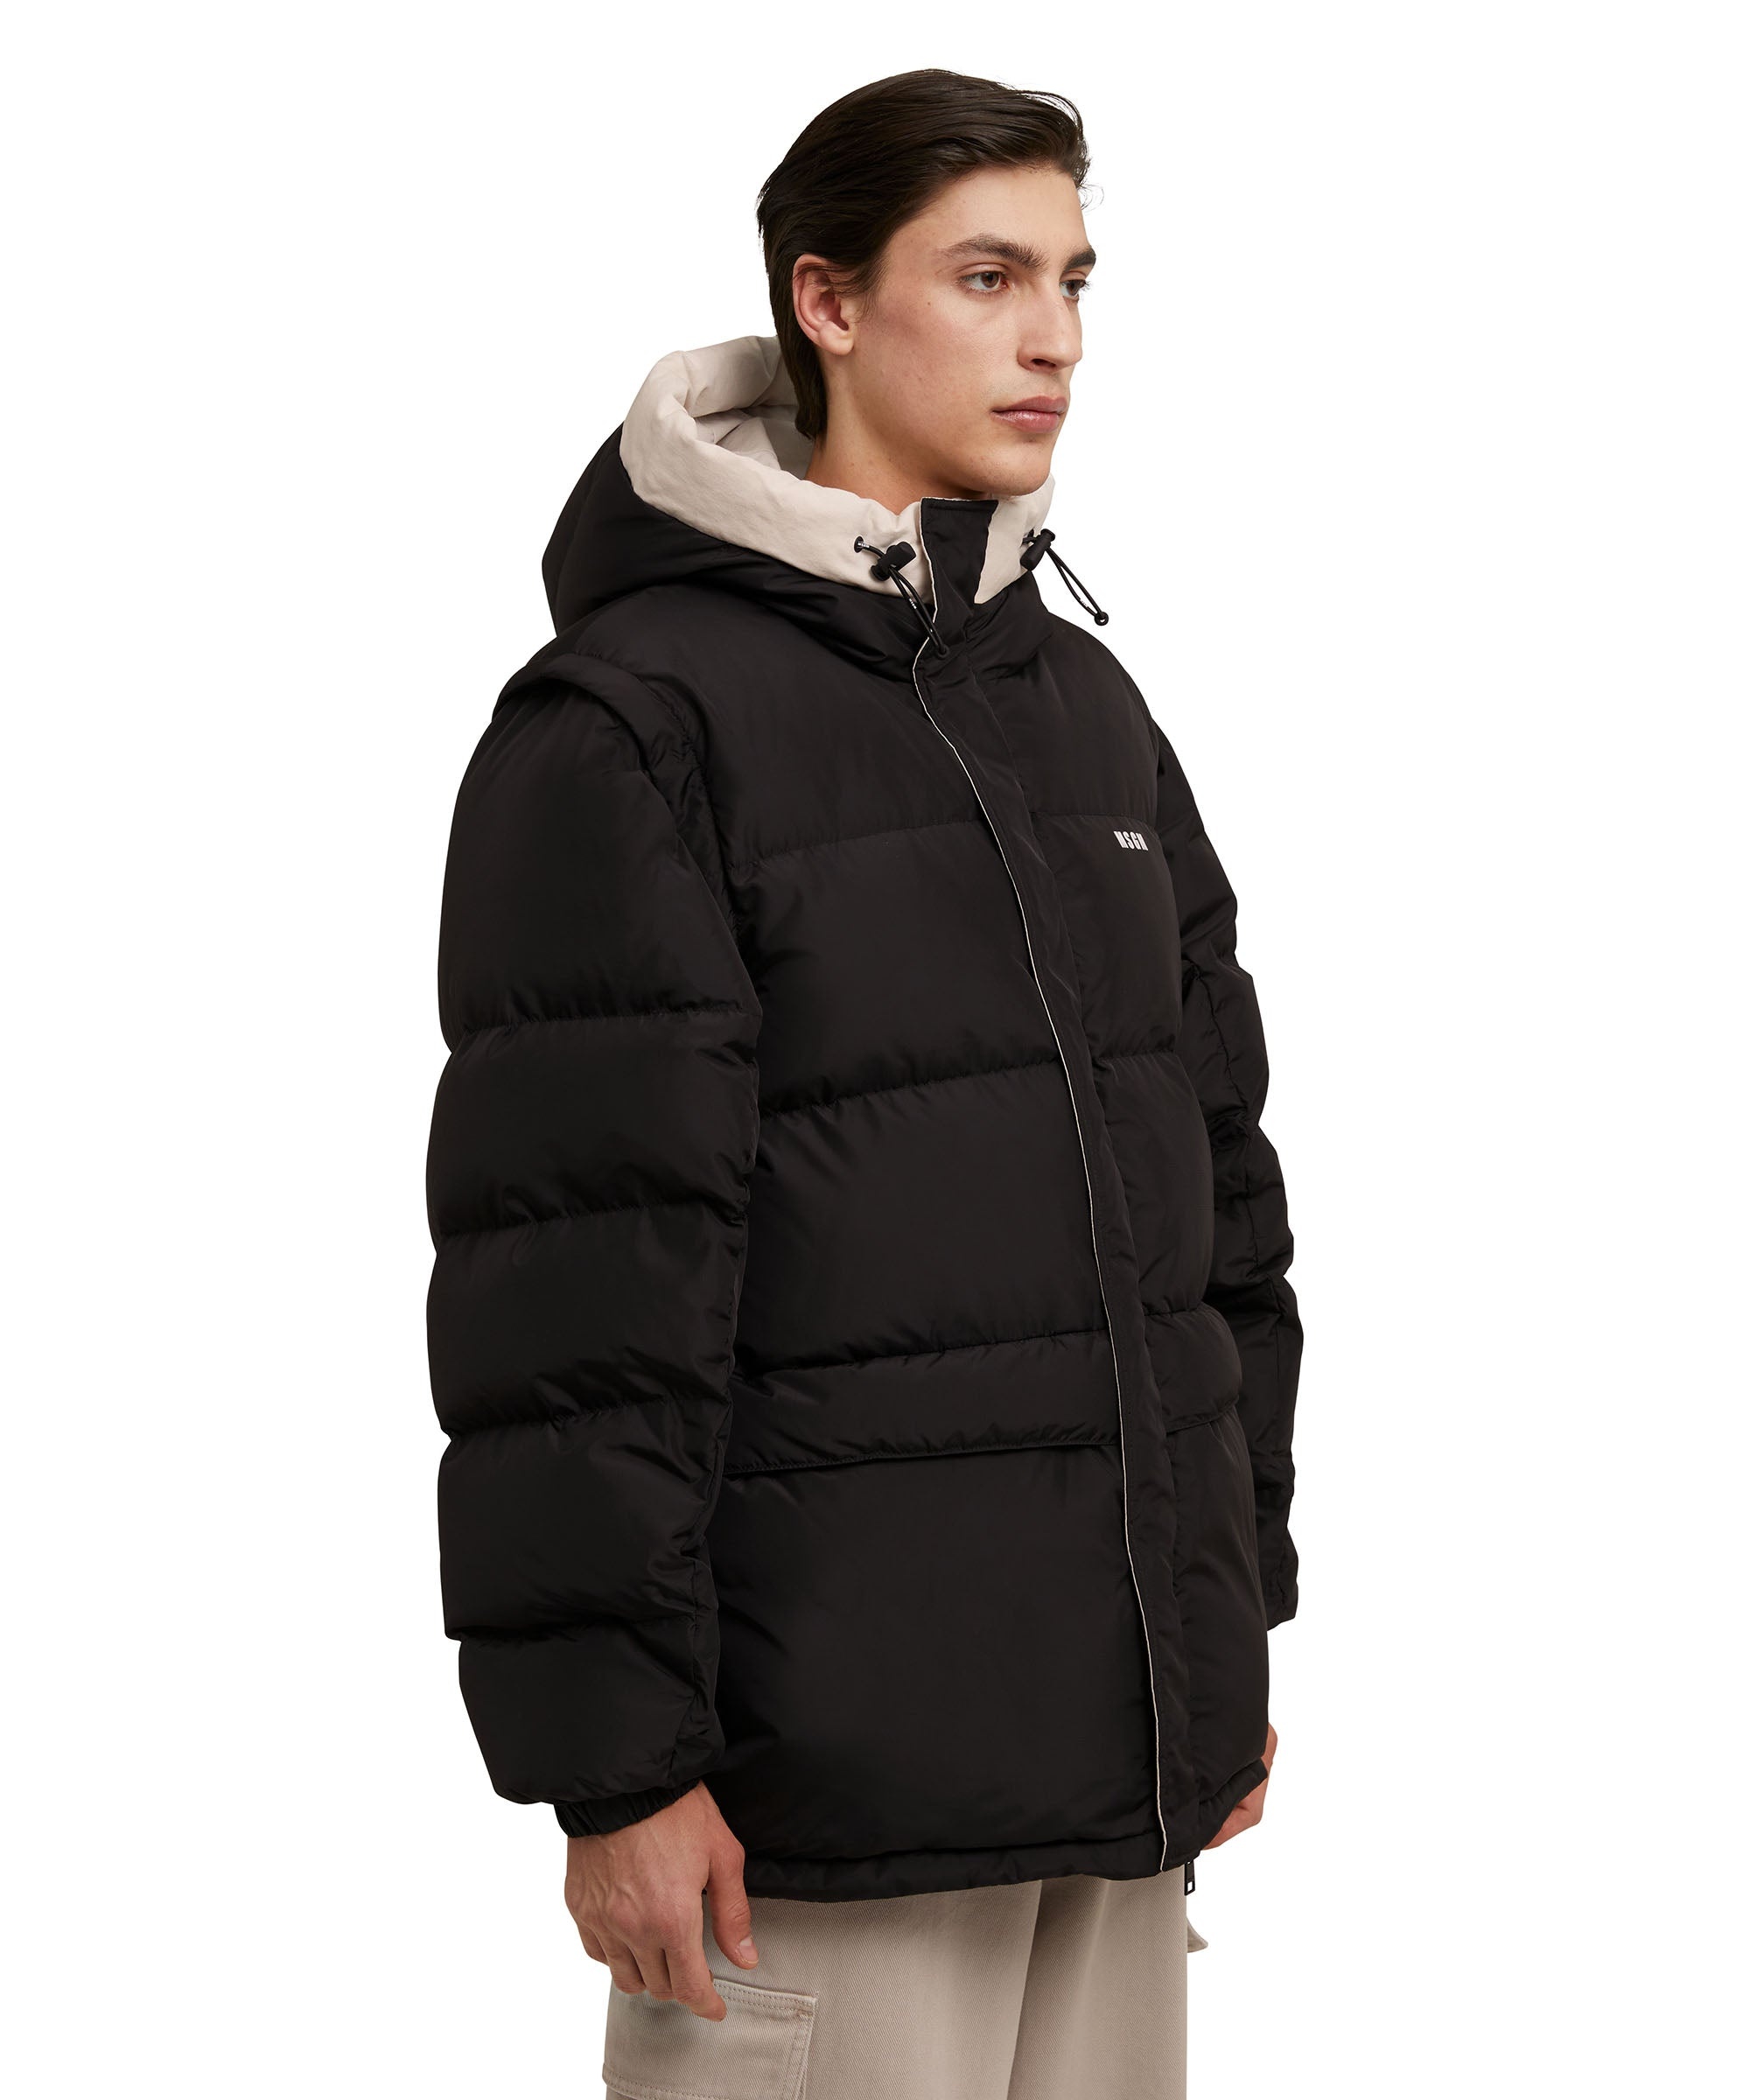 "Micro ripstop" down jacket with micro logo - 4